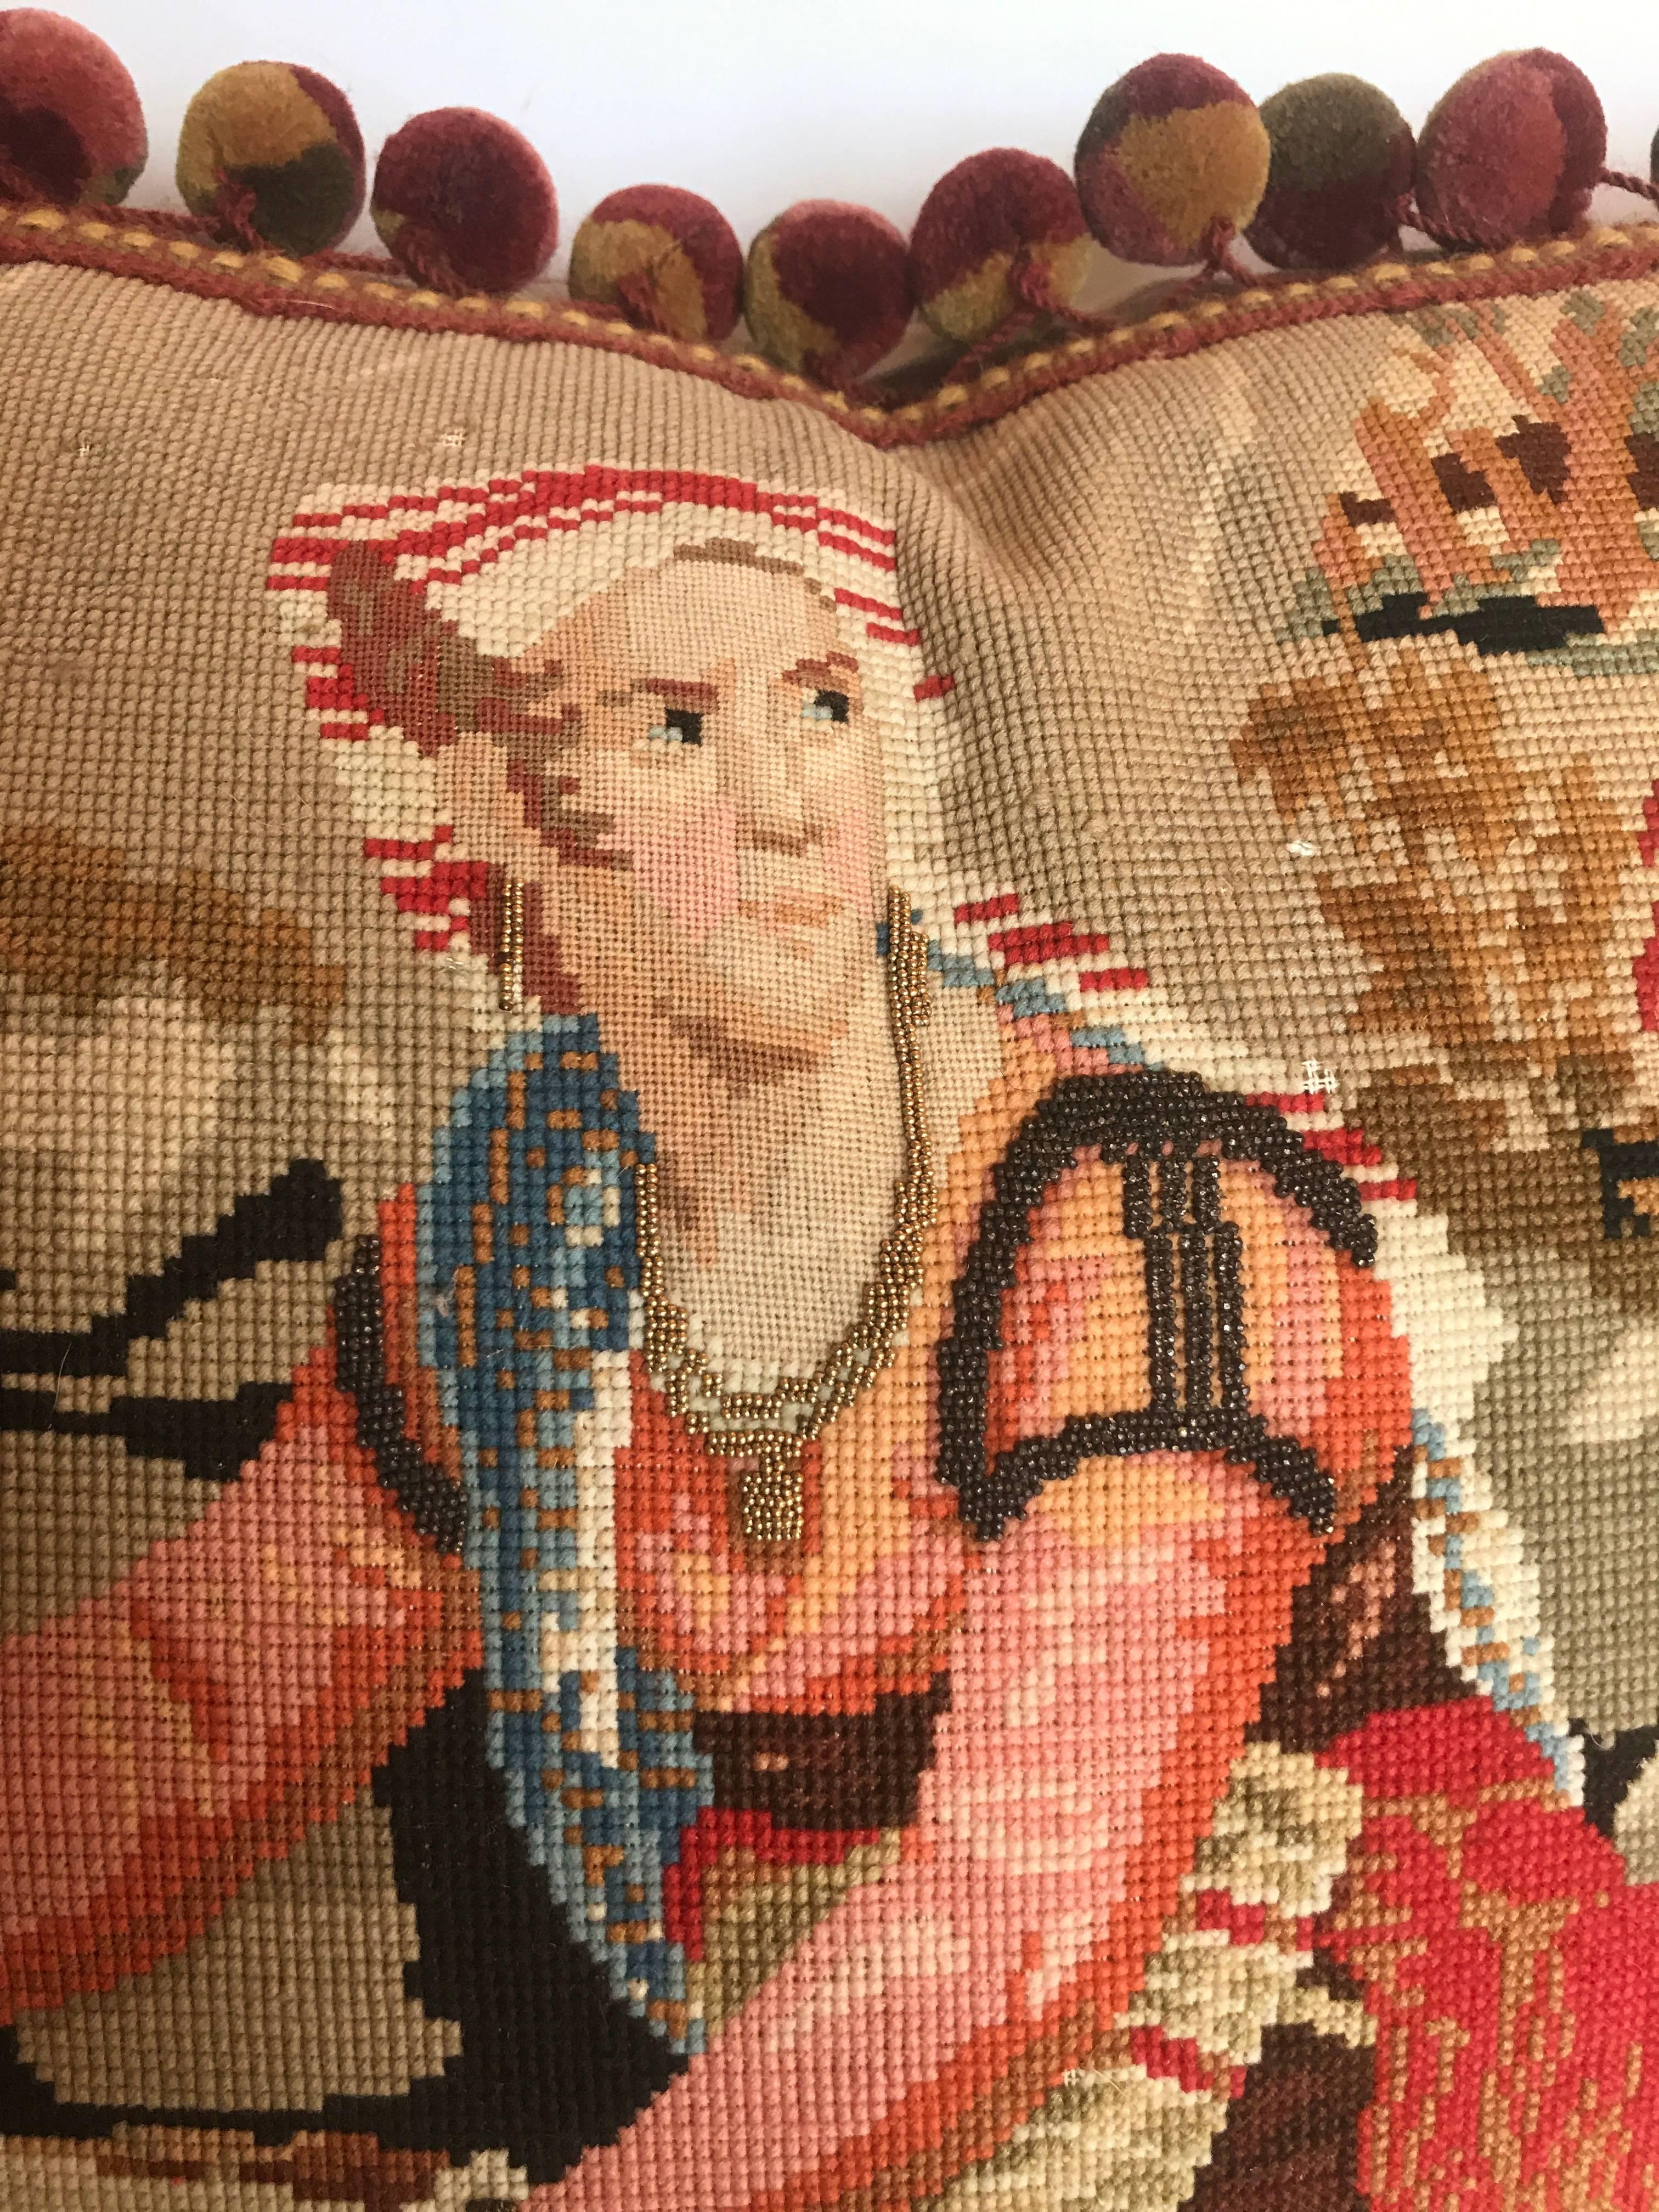 Custom one of a kind pillow cut from an antique English needlepoint tapestry. Very fine work on the detail of the faces with metallic beading. Minor loss of wool in background area due to age of piece. Tapestry is trimmed with designer wool ball